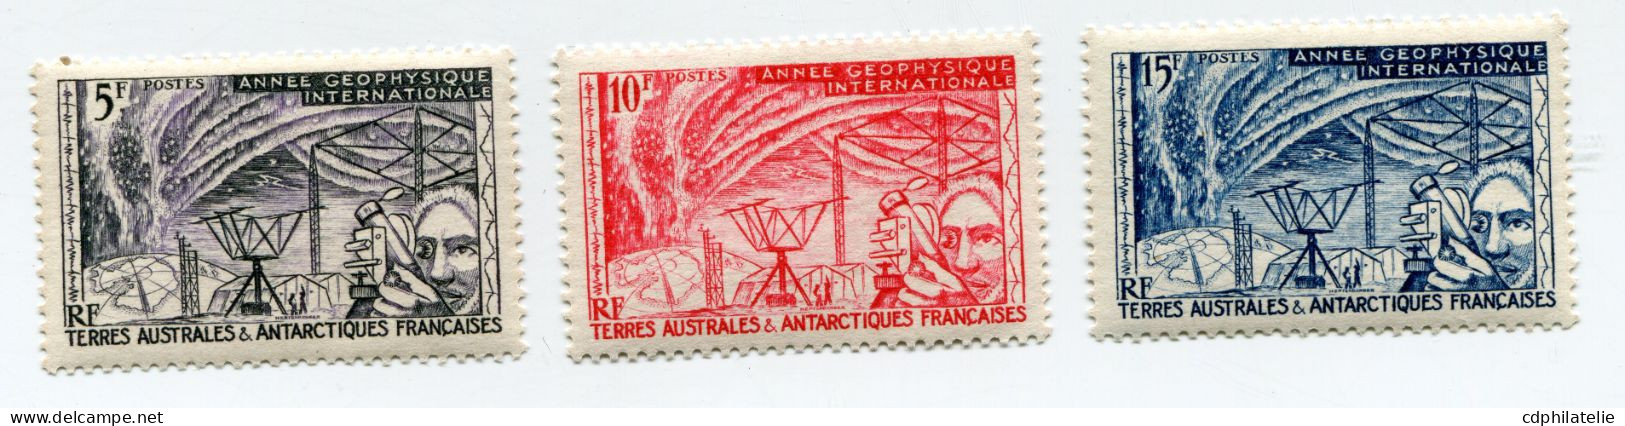 T. A. A. F. N°8 /10 ** ANNEE GEOPHYSIQUE INTERNATIONALE - Unused Stamps